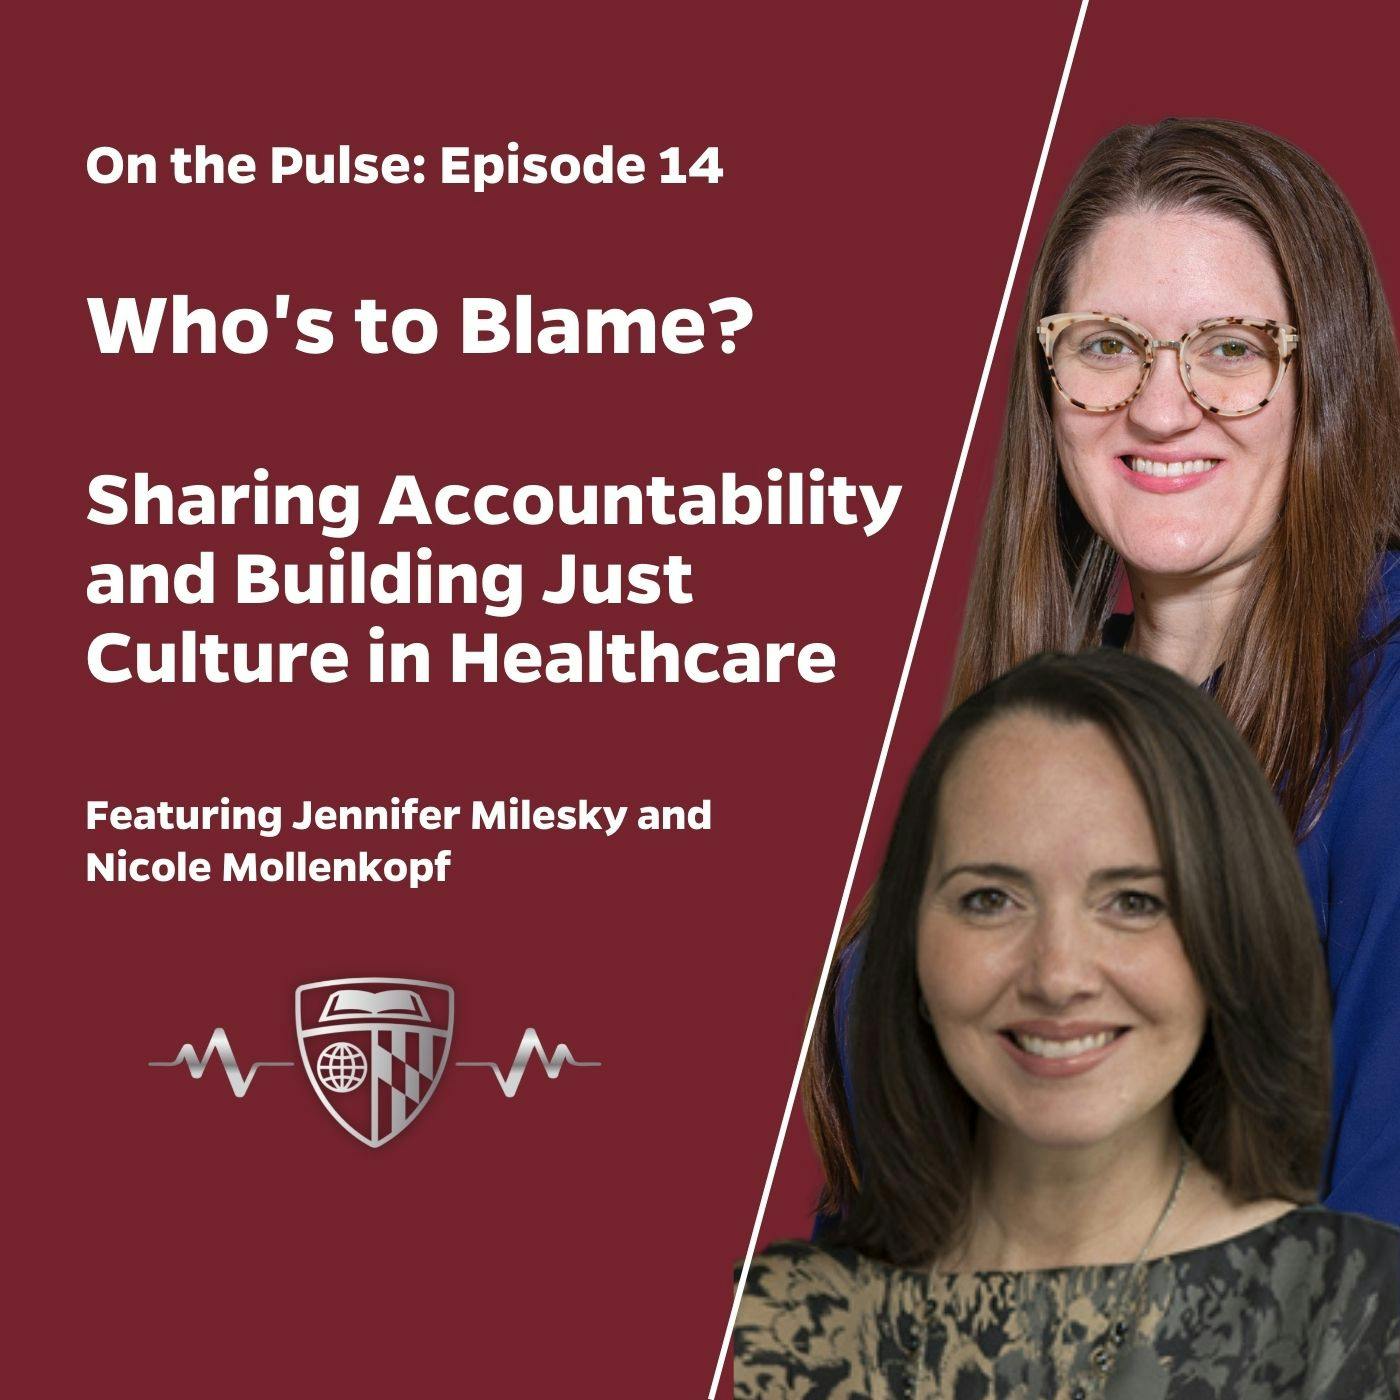 On the Pulse: Who’s to Blame? Building just culture within health care